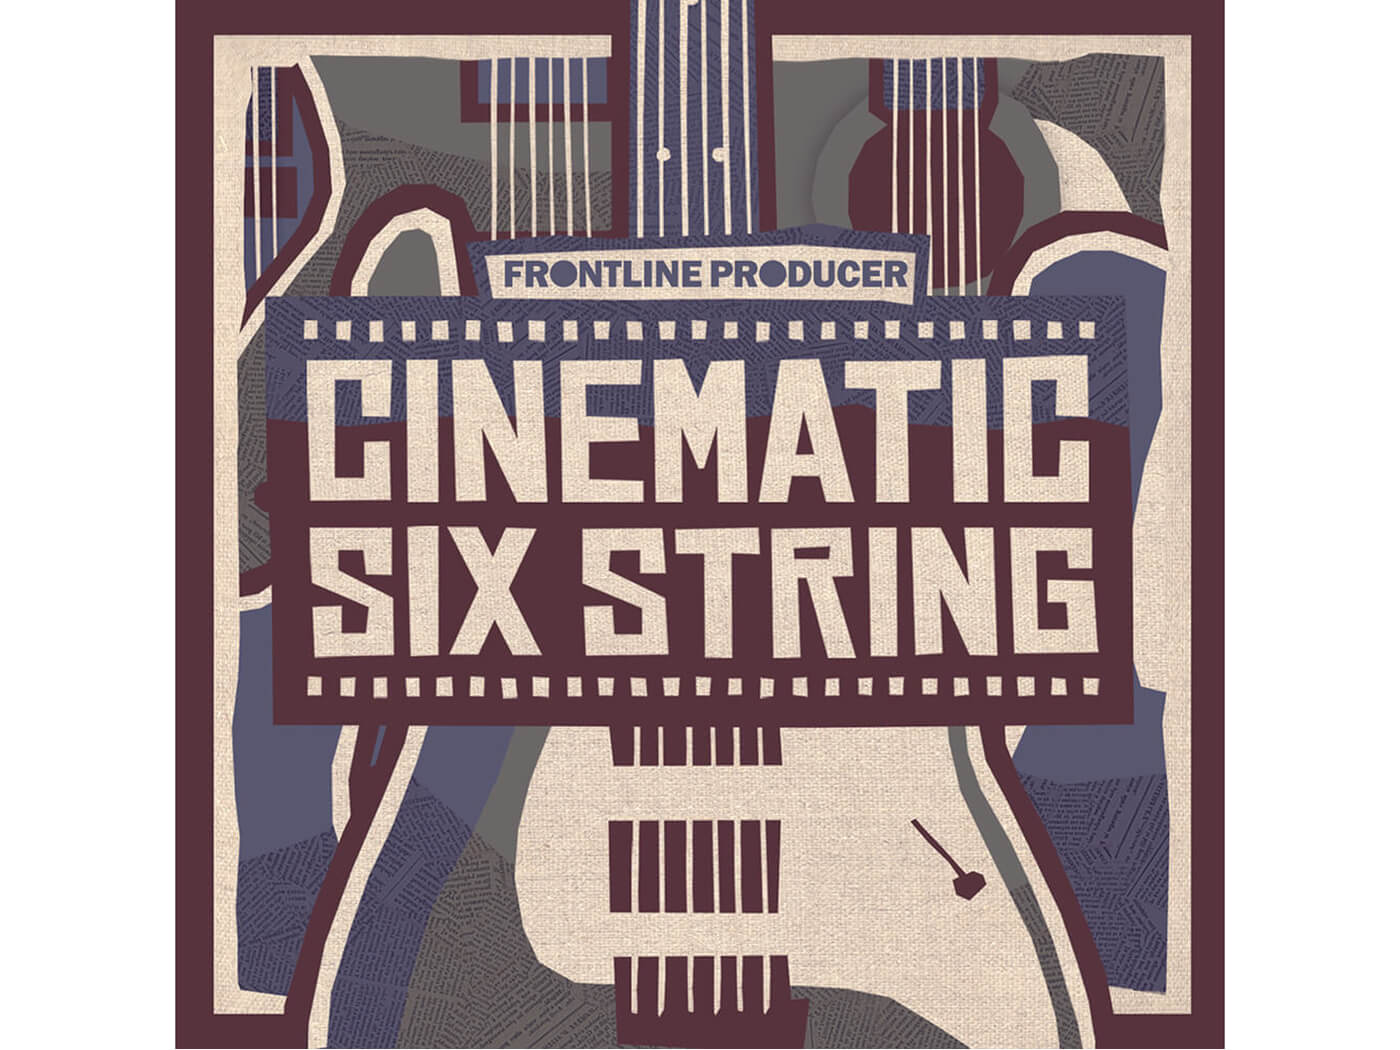 Frontline Producer - Cinematic Six String